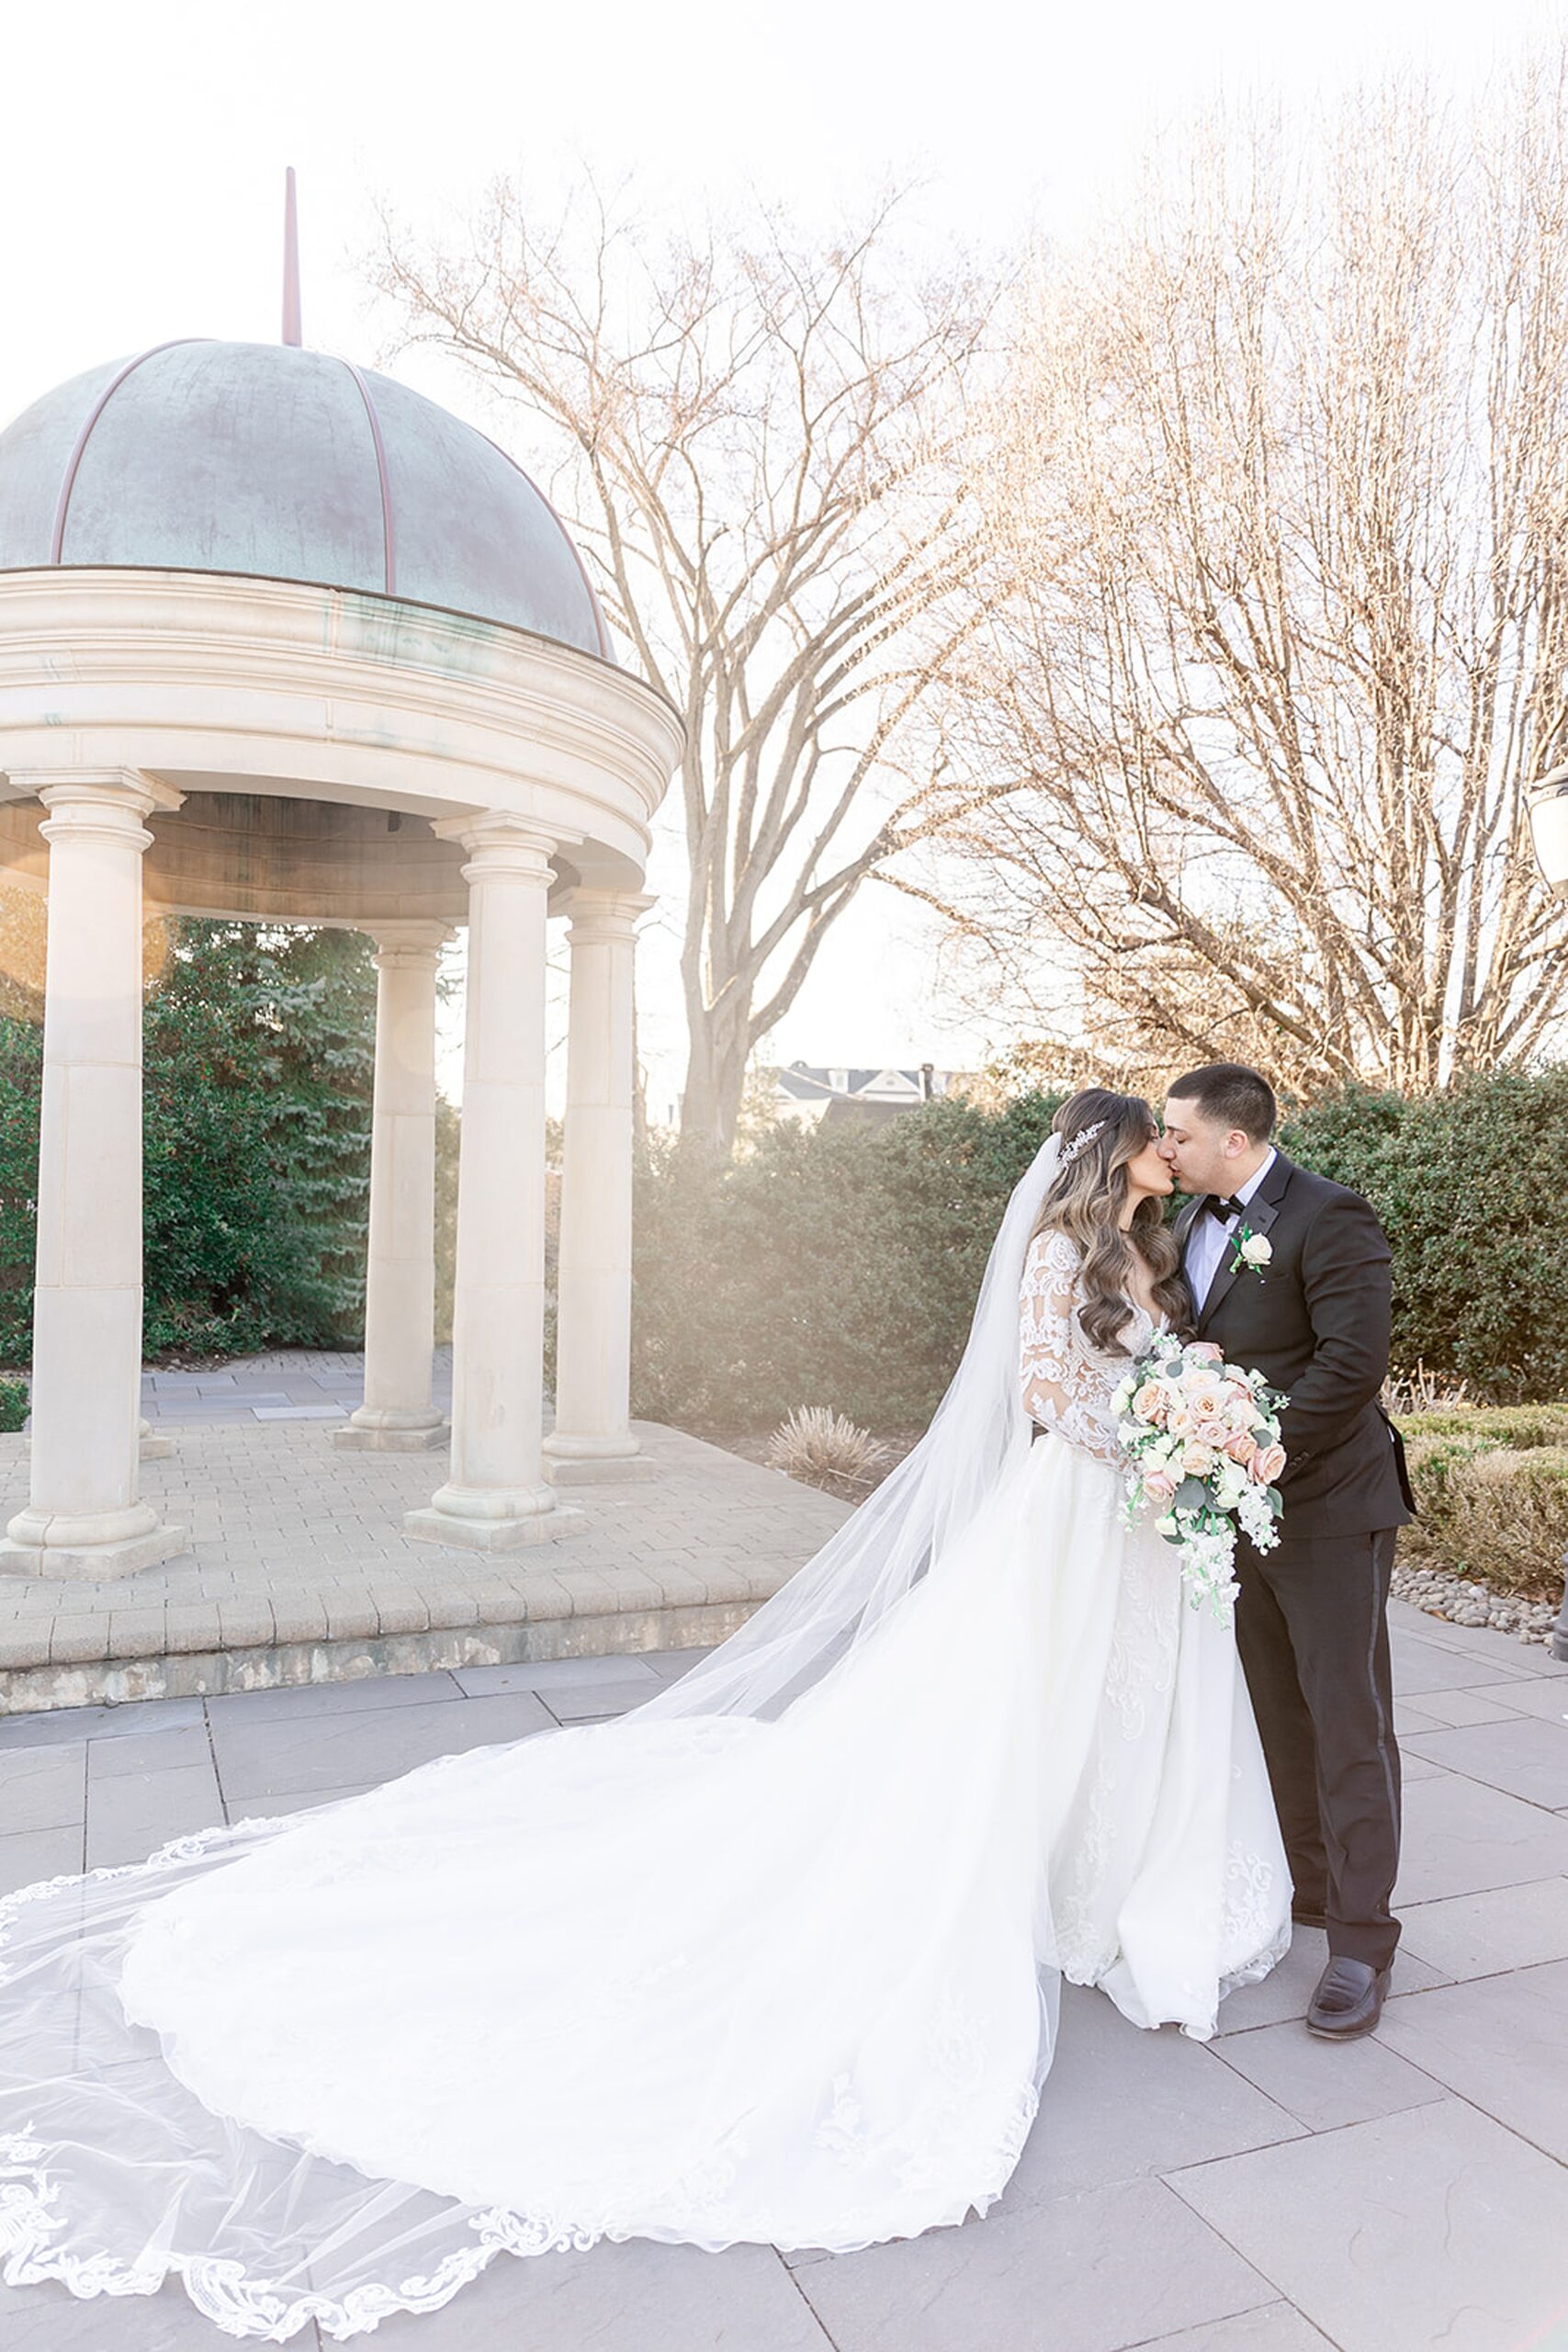 Newlyweds kiss with the long dress and veil flowing behind them at sunset by a copper top gazebo at the rockleigh wedding venue